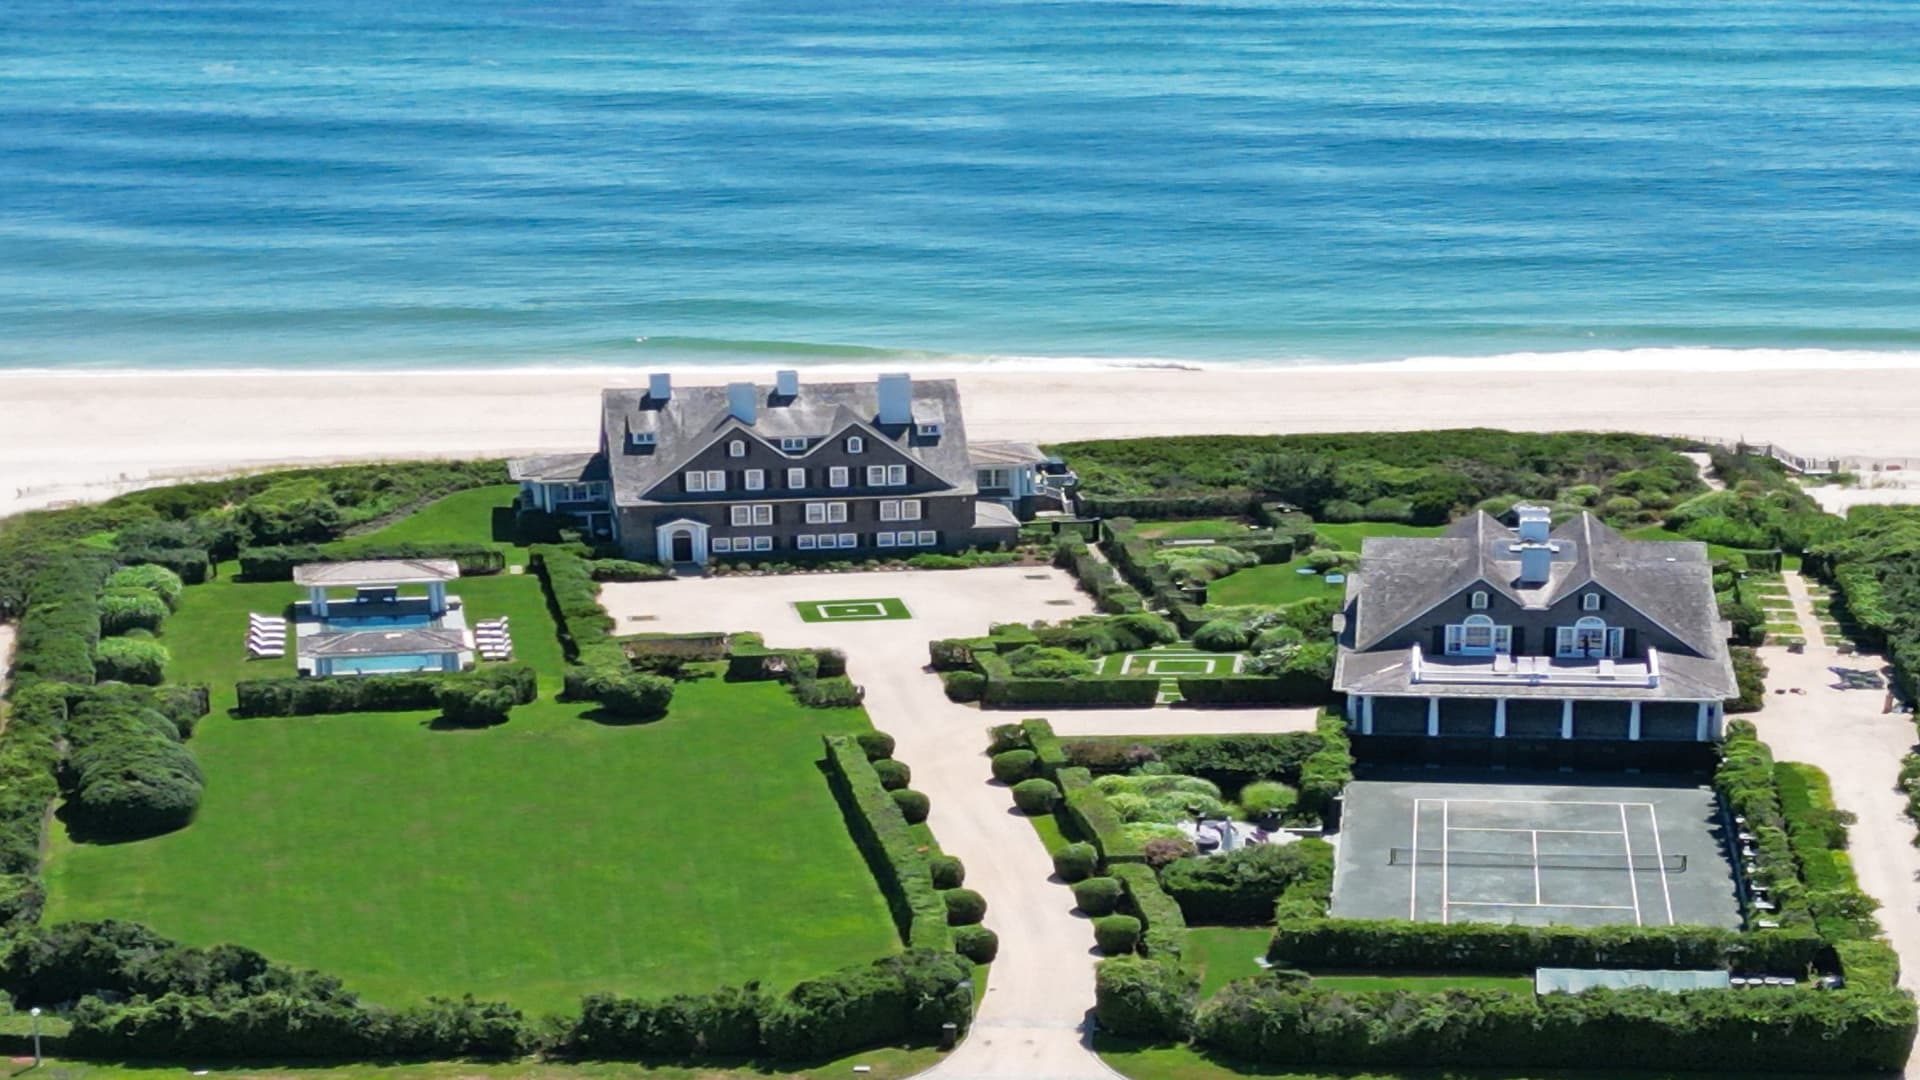 Hamptons mansion once listed for $150 million sells at auction for less than $90 million